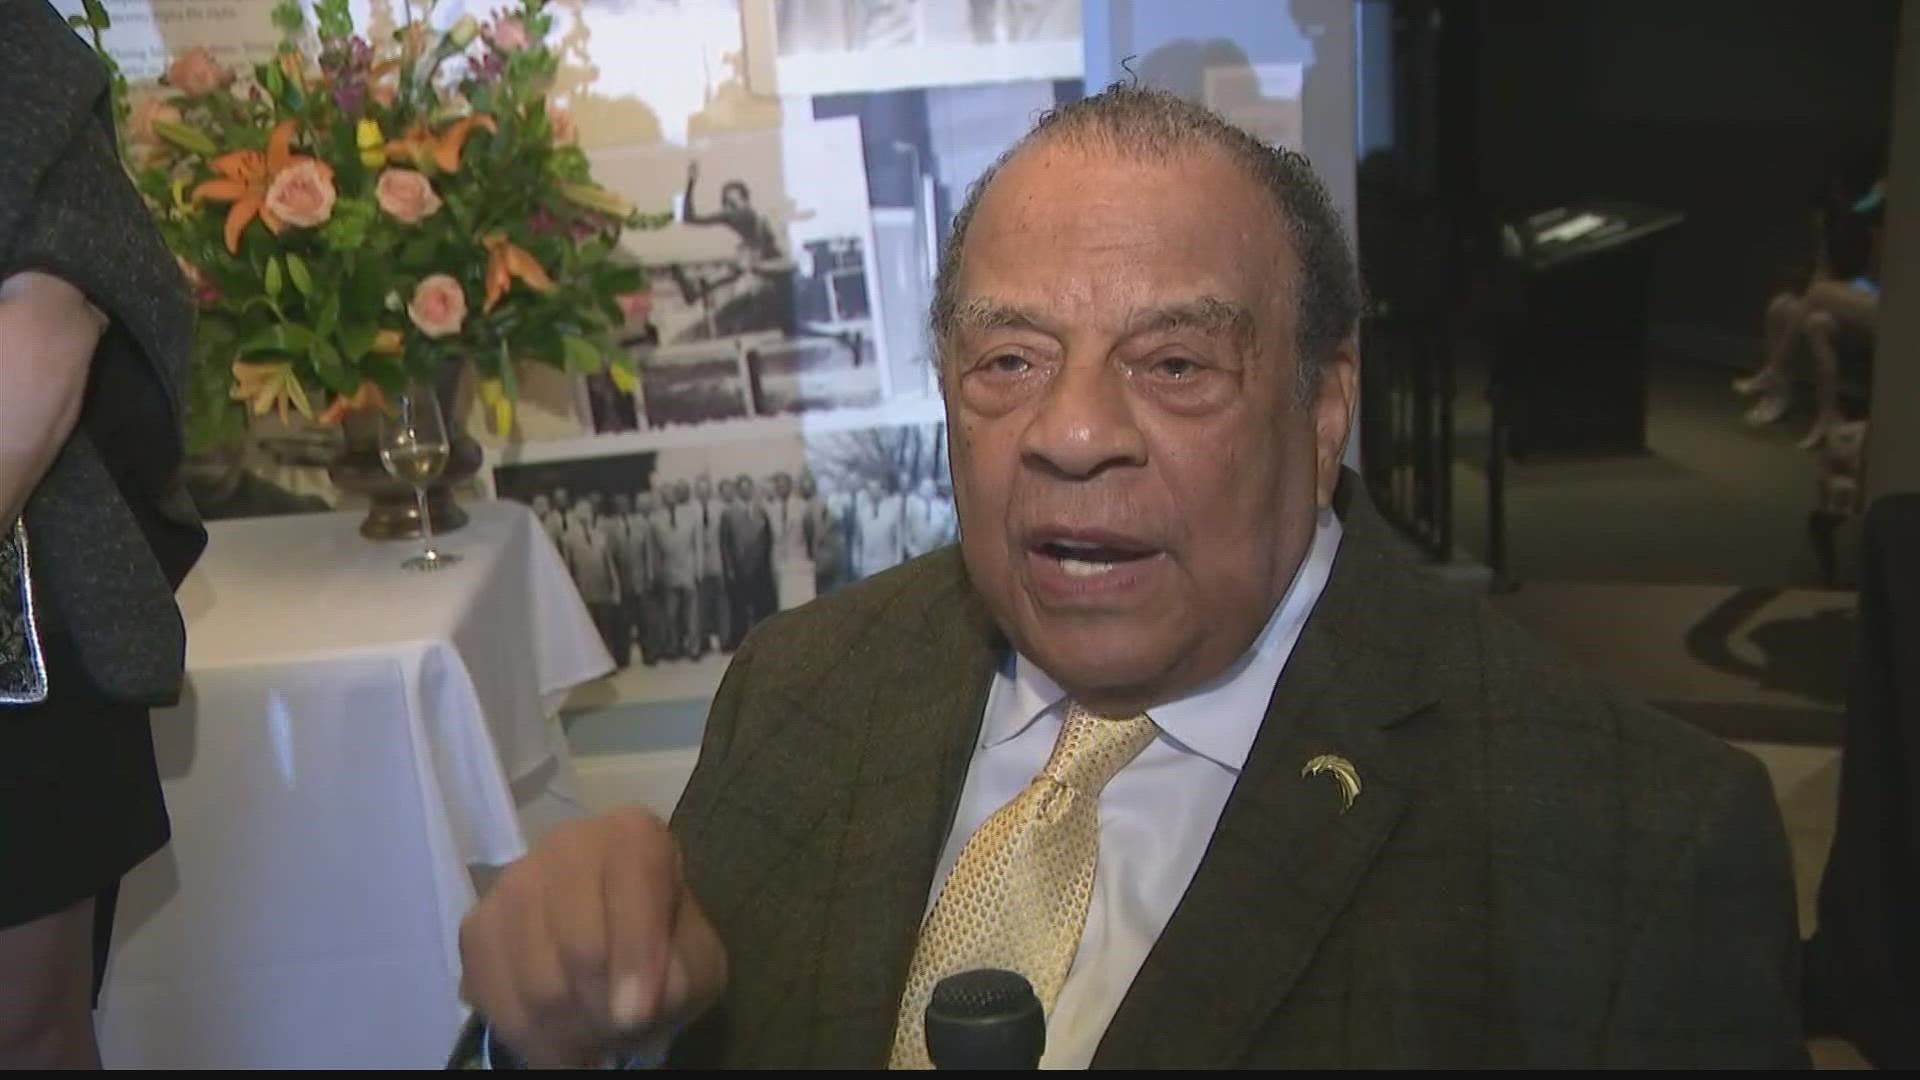 The City of Atlanta is celebrating Andrew Young as he is about to turn 90 years old.